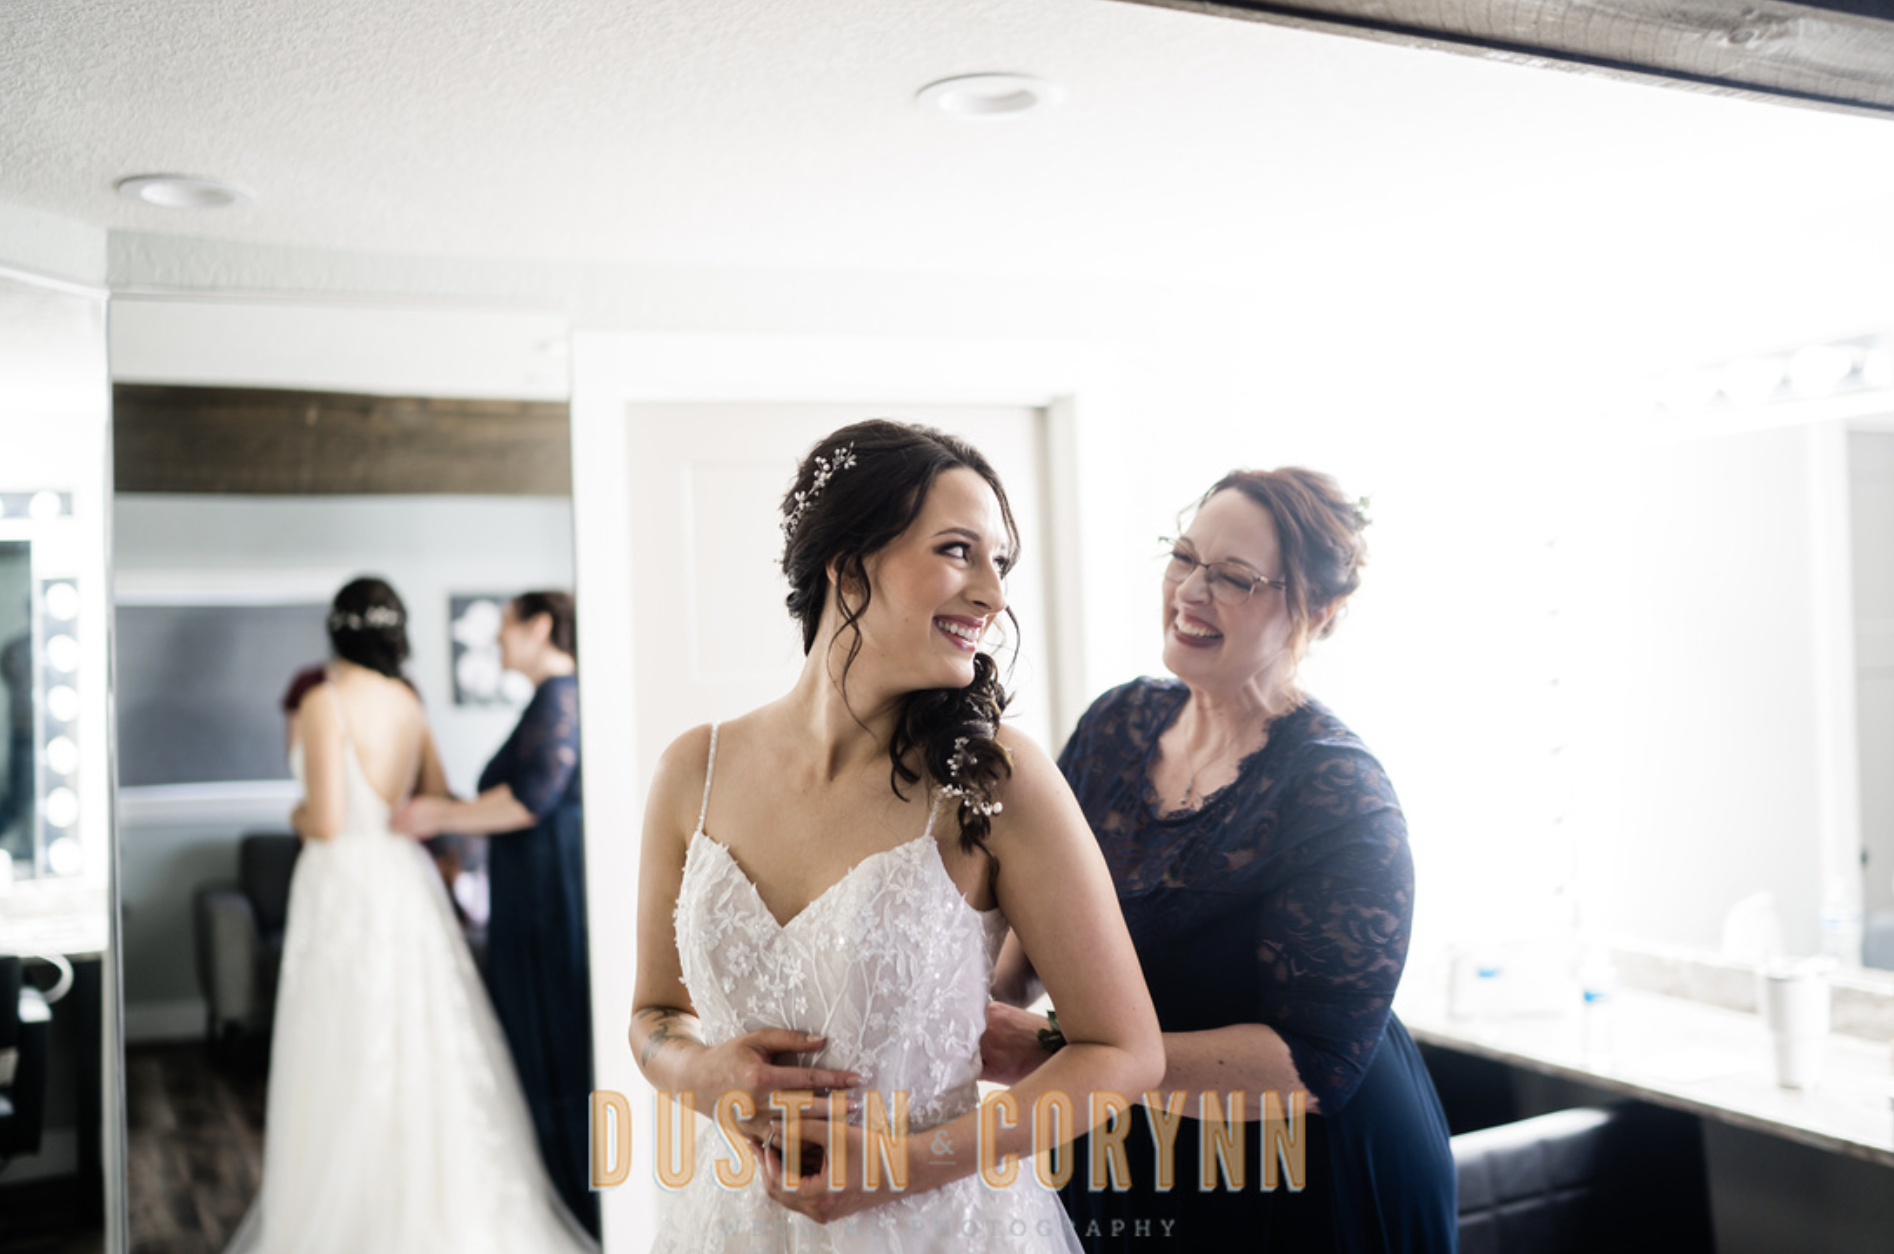 Fort Wayne wedding photographer captures bride getting buttoned into wedding gown